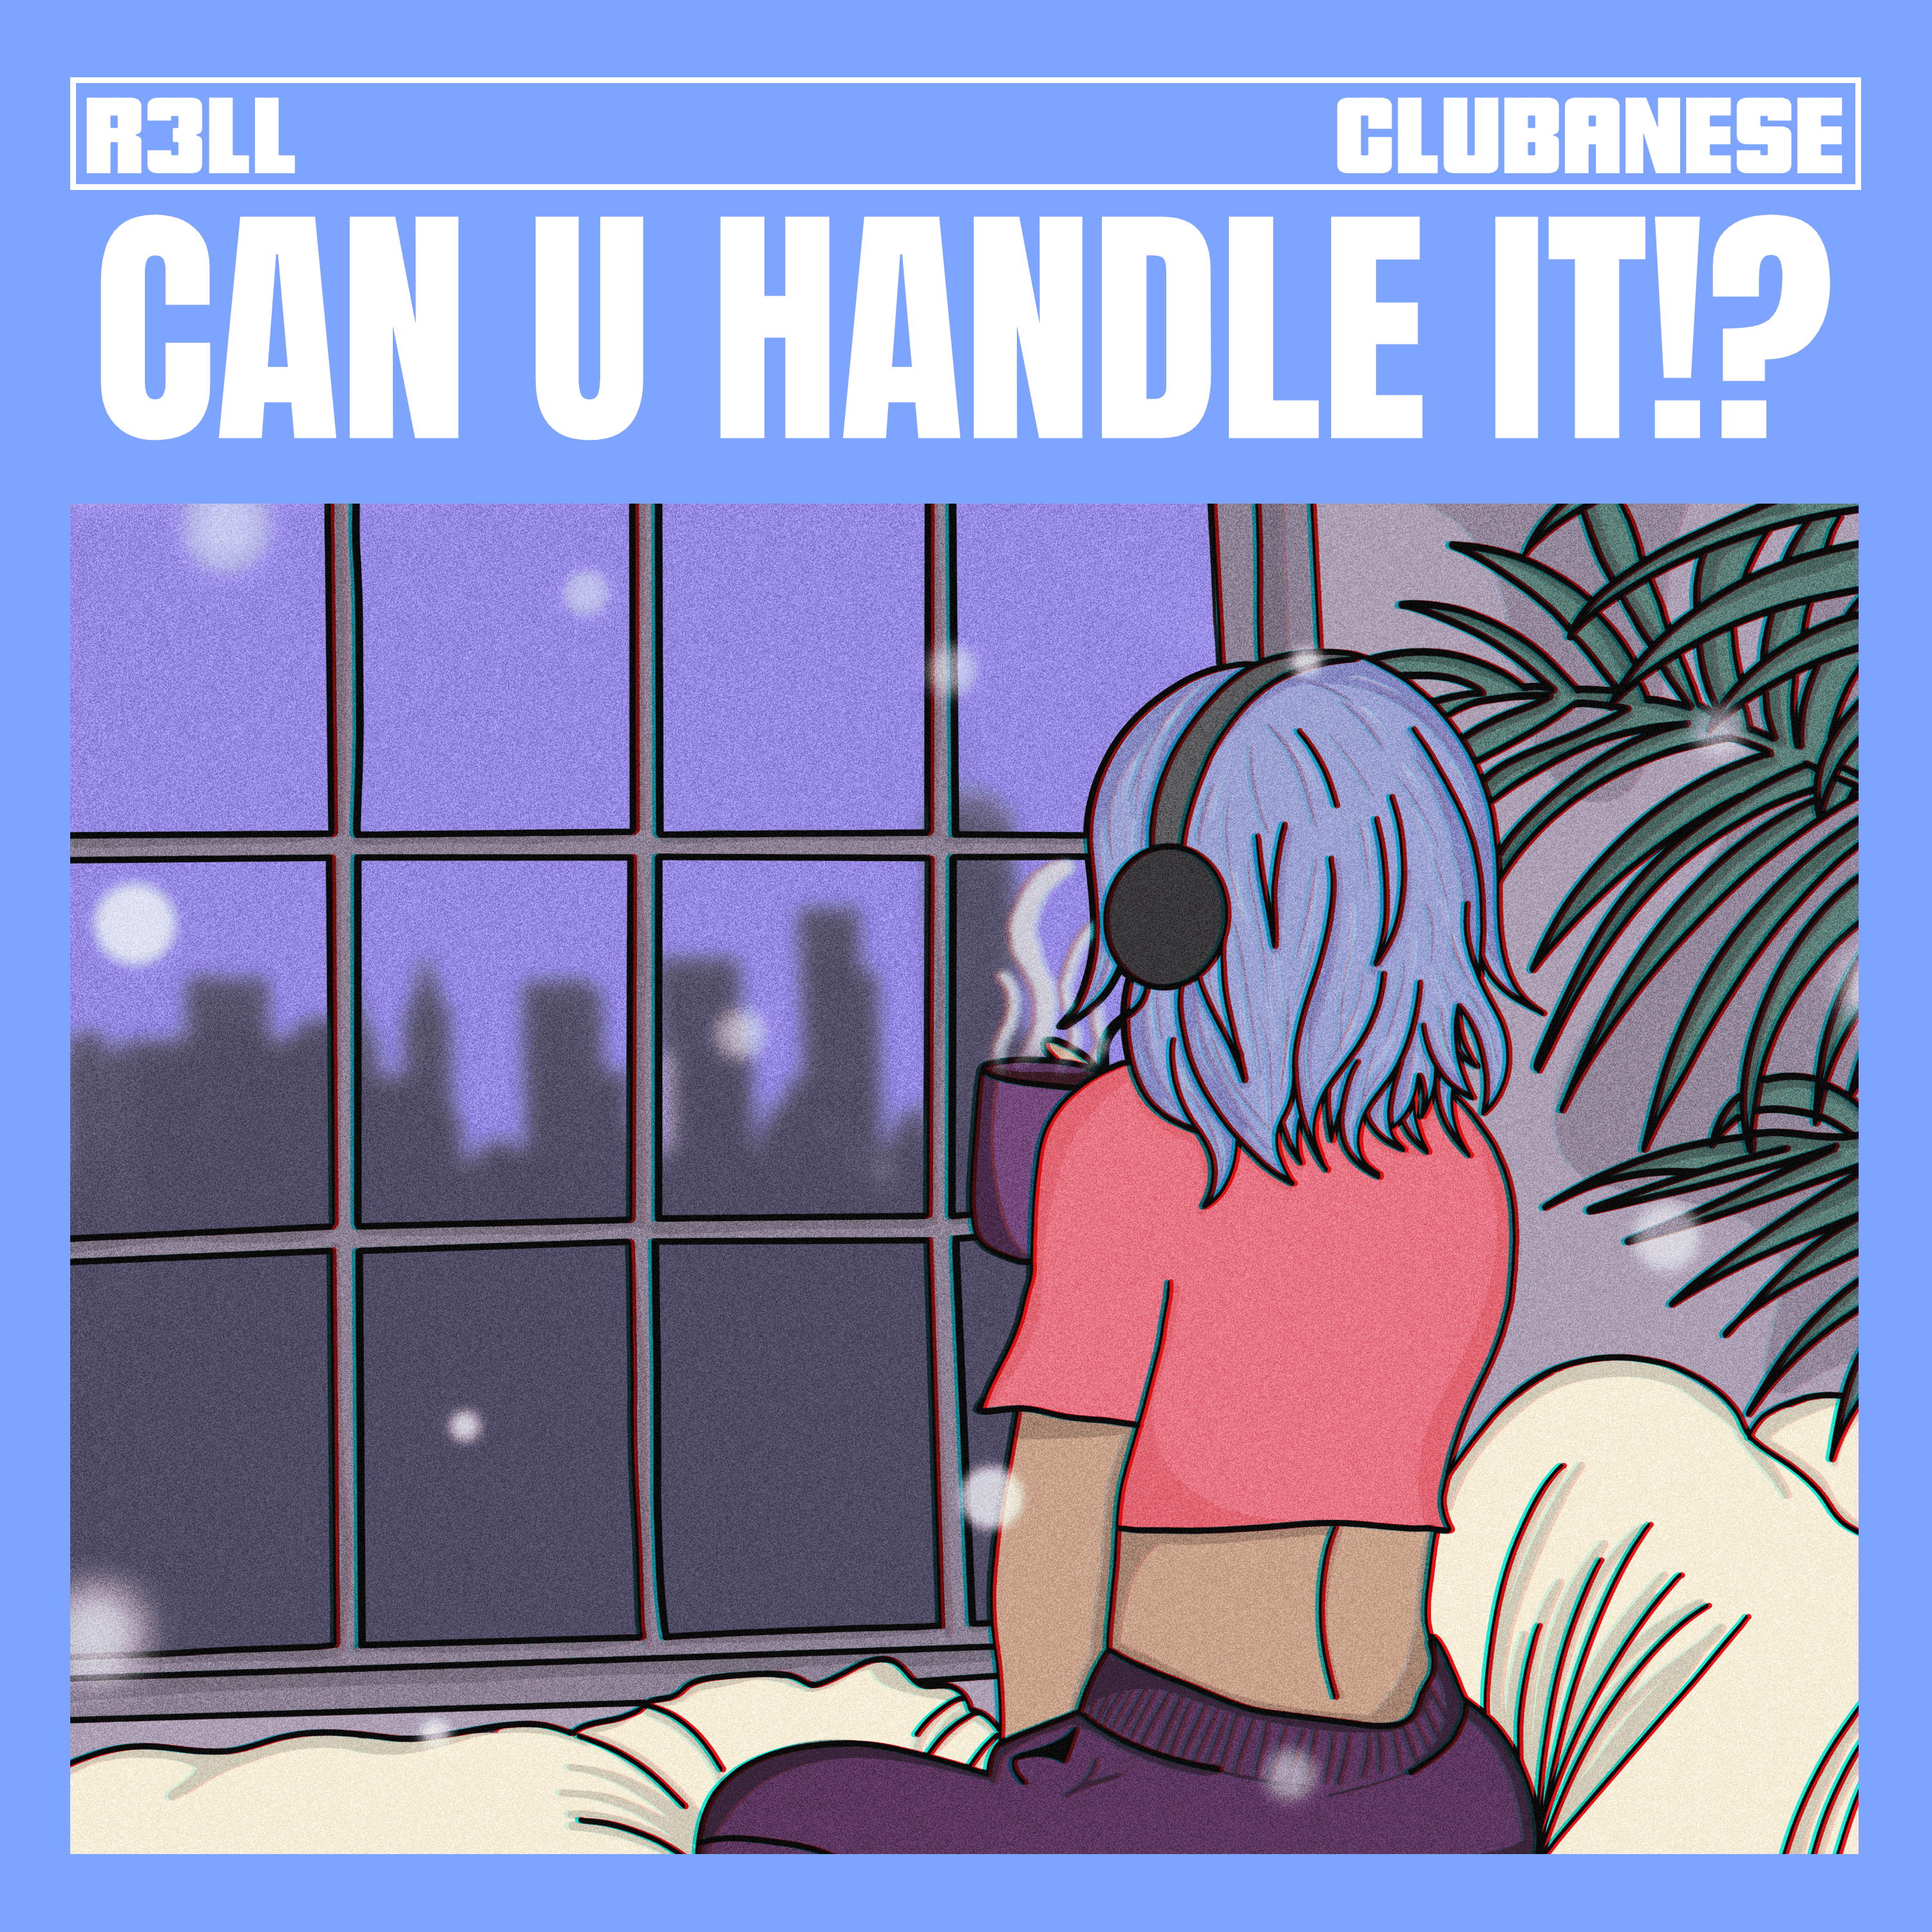 Cover art for R3LL's song: Can U Handle It!?